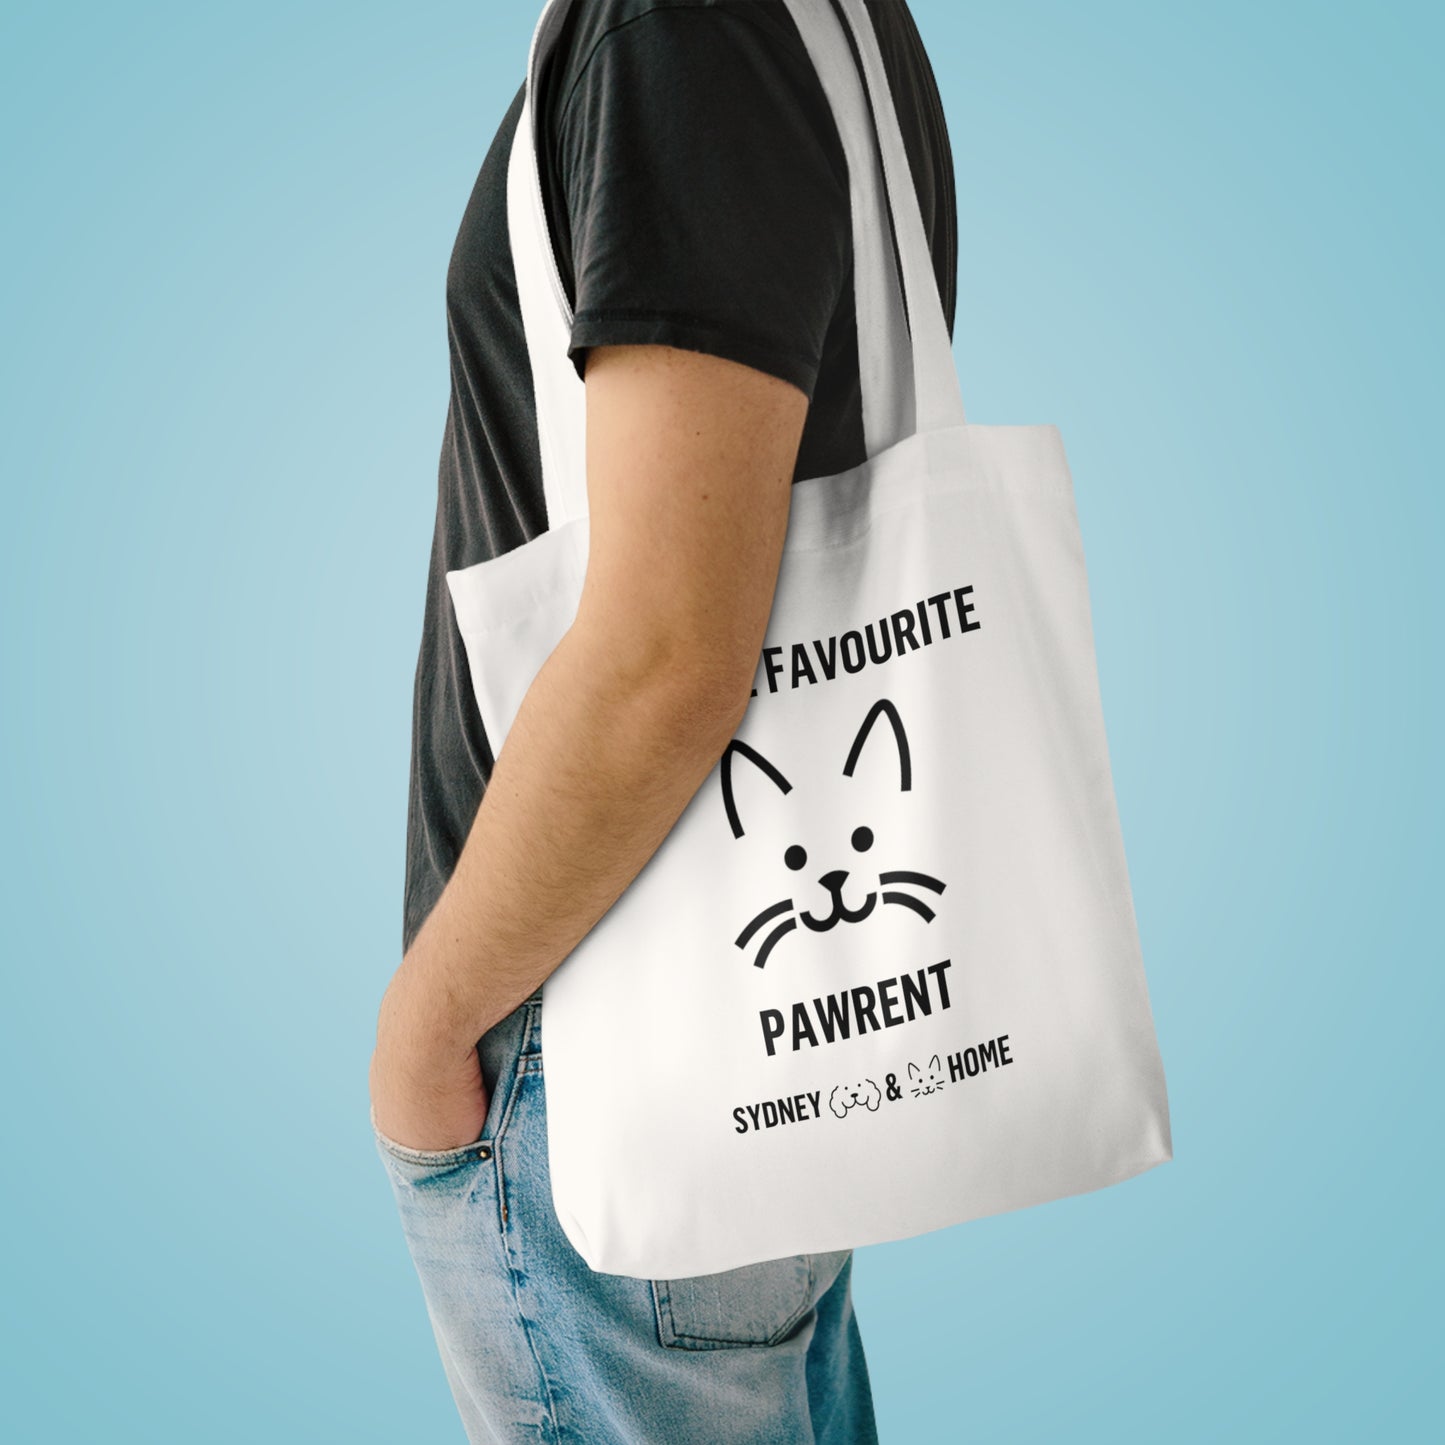 Tote Bag - I'm the Favourite Pawrent (Cat)